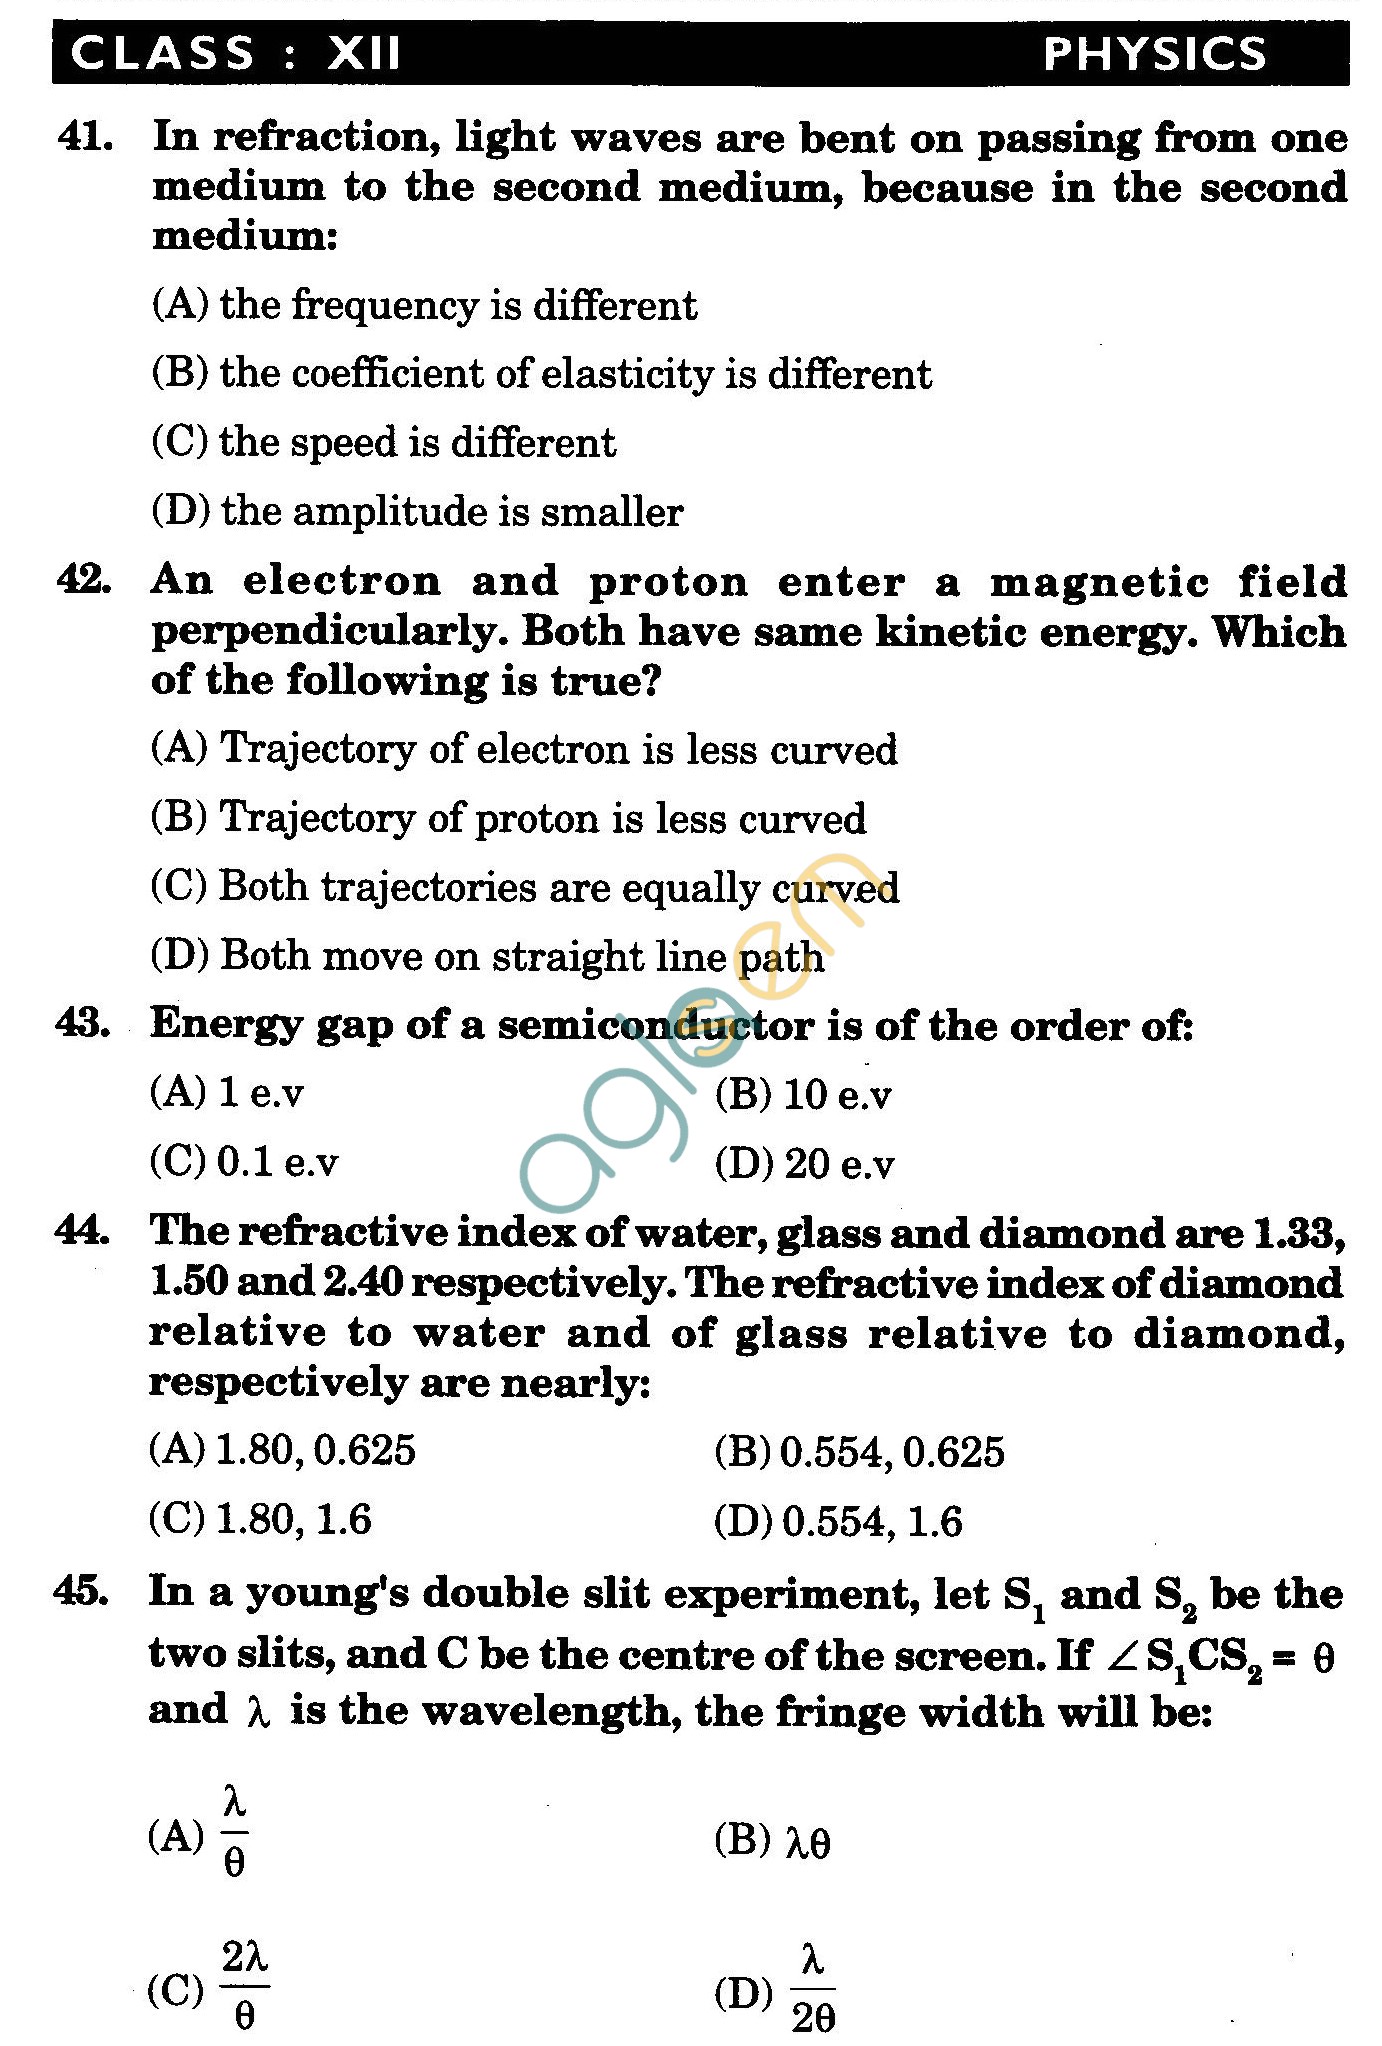 NSTSE 2009 Class XII PCM Question Paper with Answers - Physics